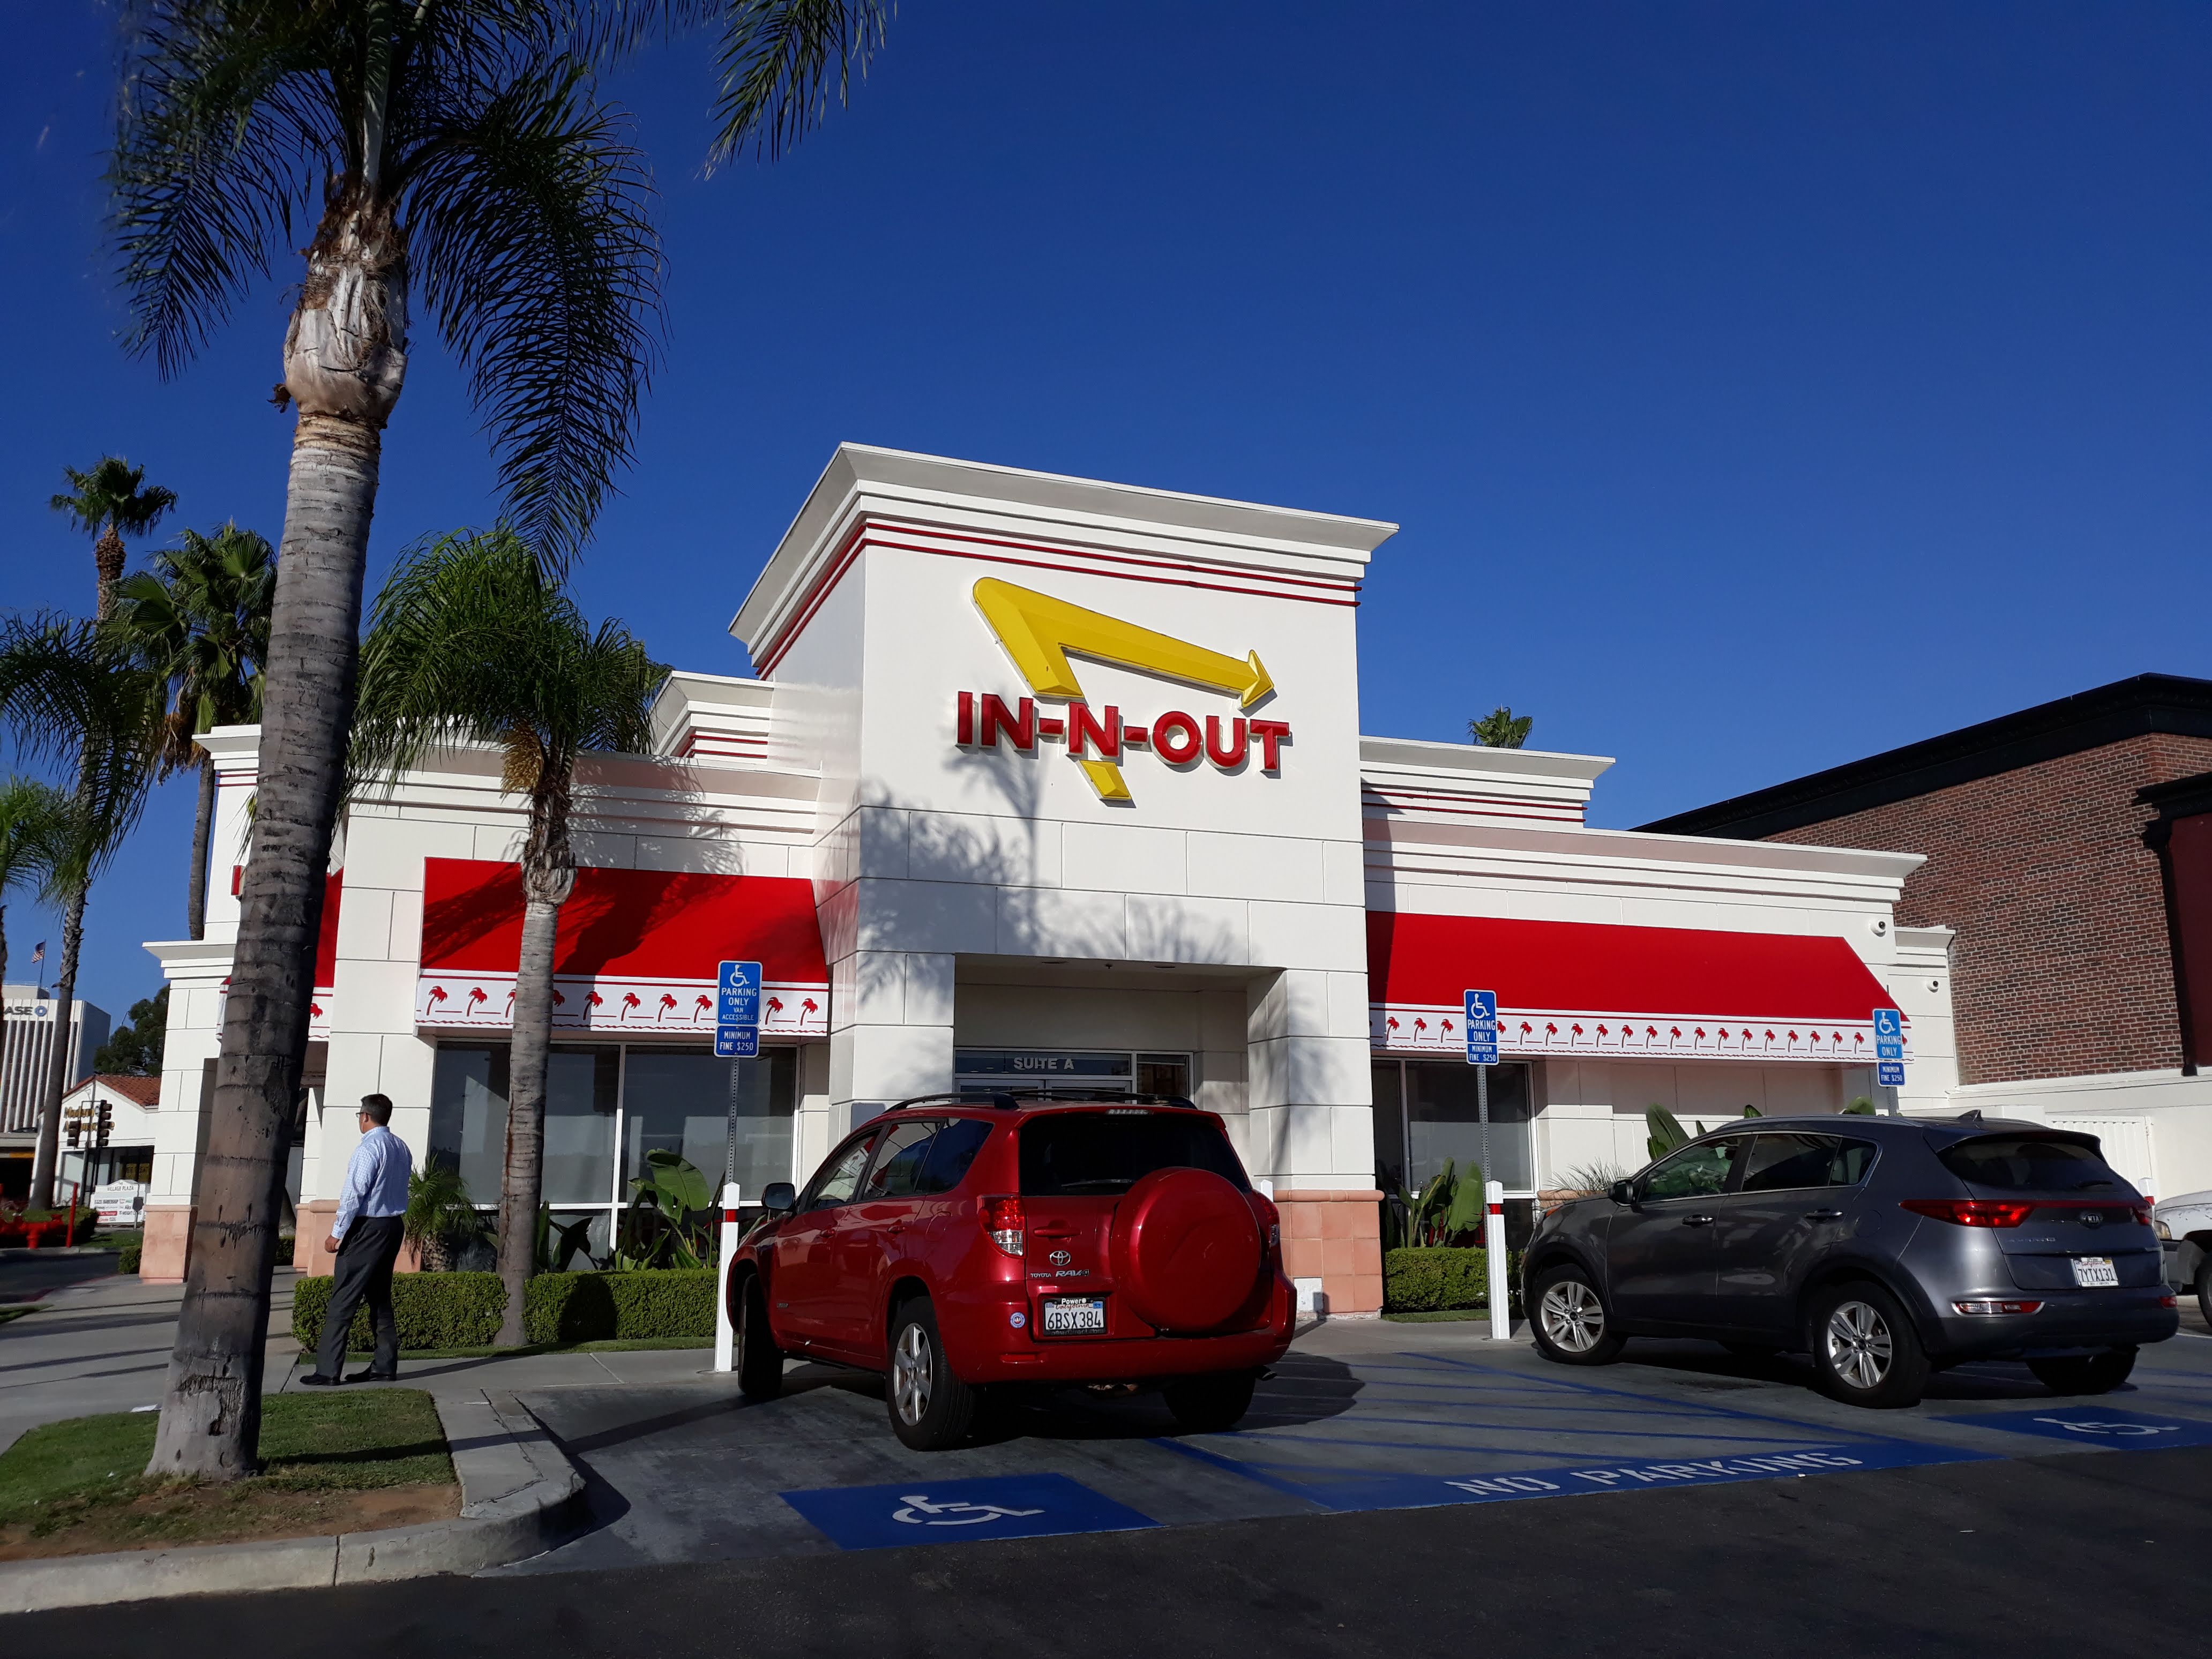 Let’s go to In-N-Out Burger!